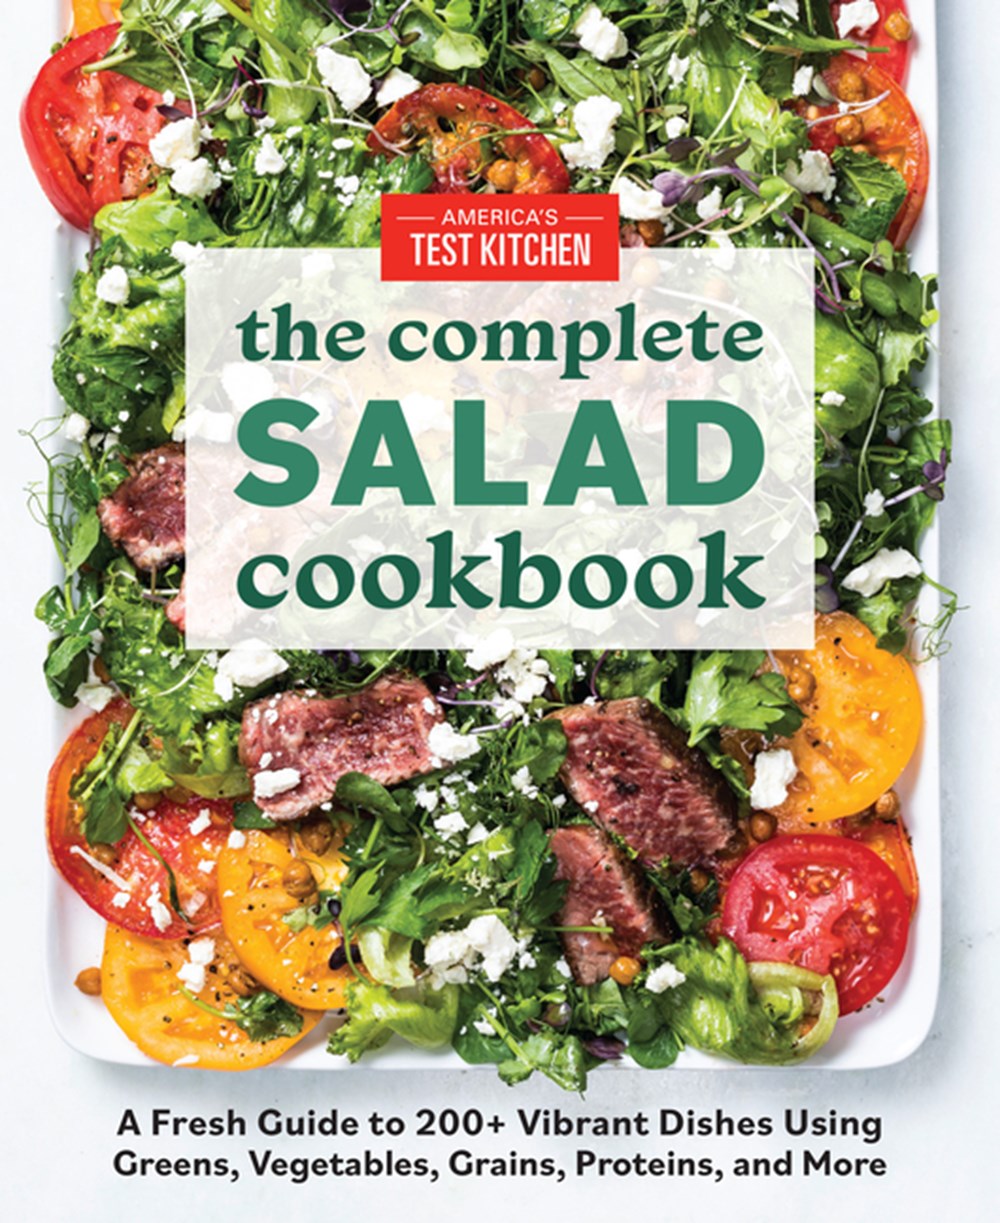 Complete Salad Cookbook: A Fresh Guide to 200+ Vibrant Dishes Using Greens, Vegetables, Grains, Prot